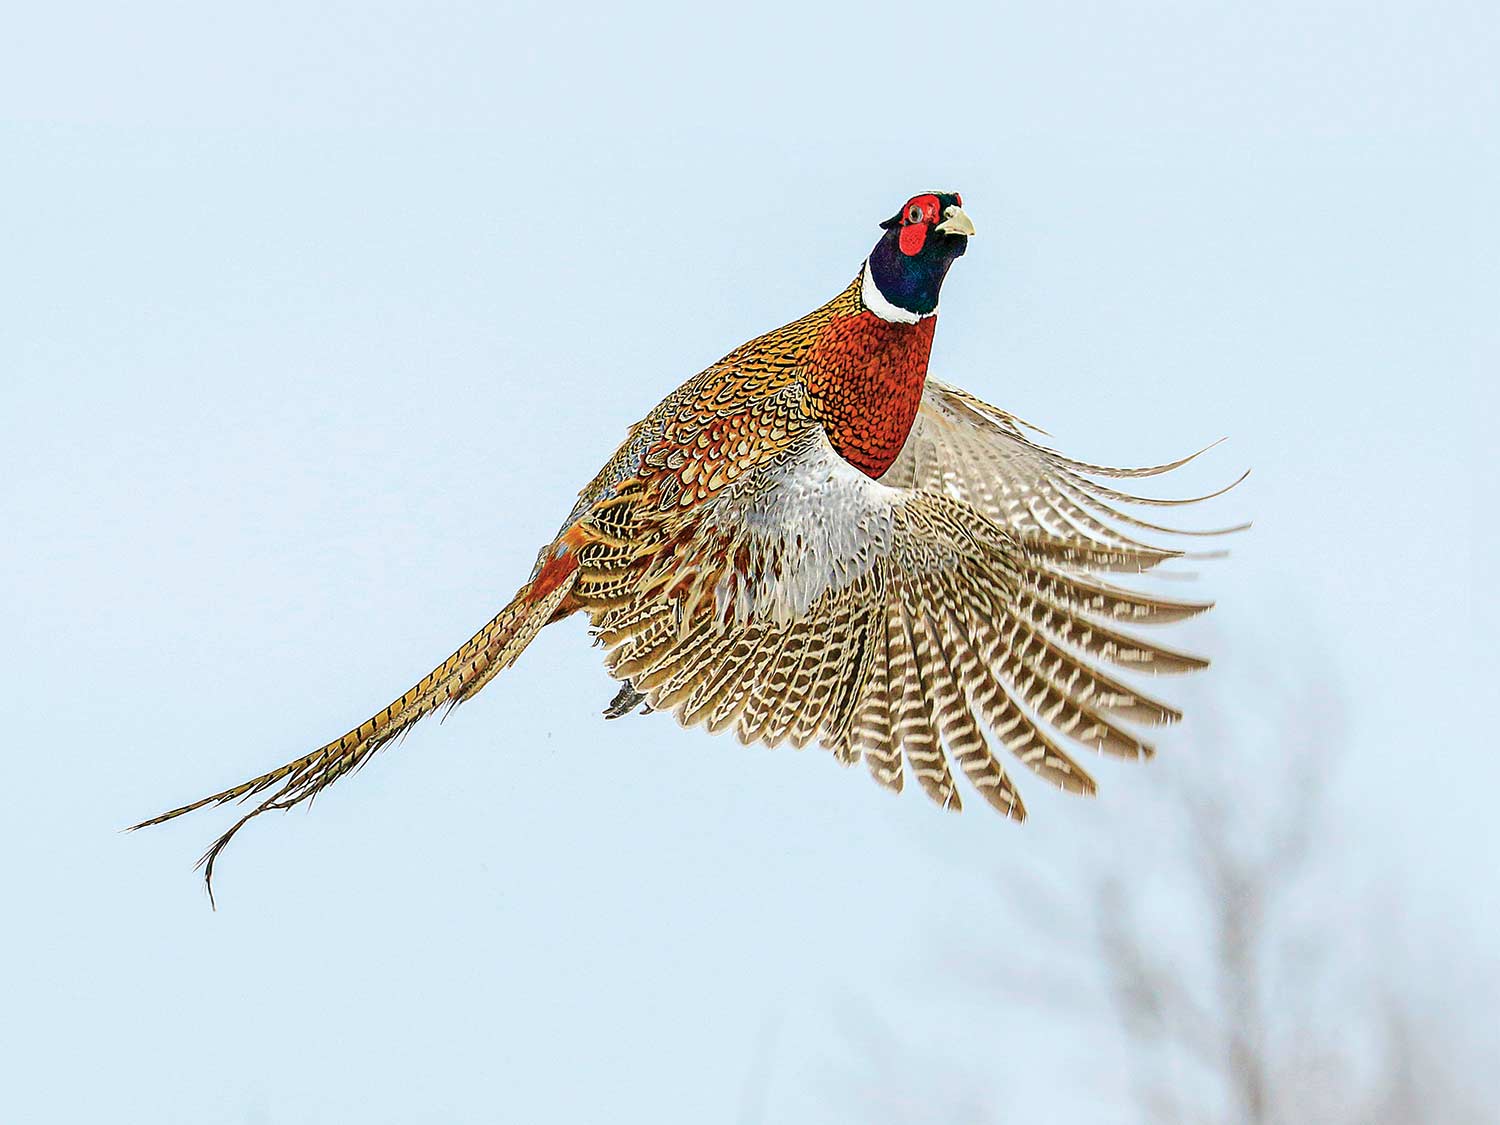 rooster pheasant flushing out